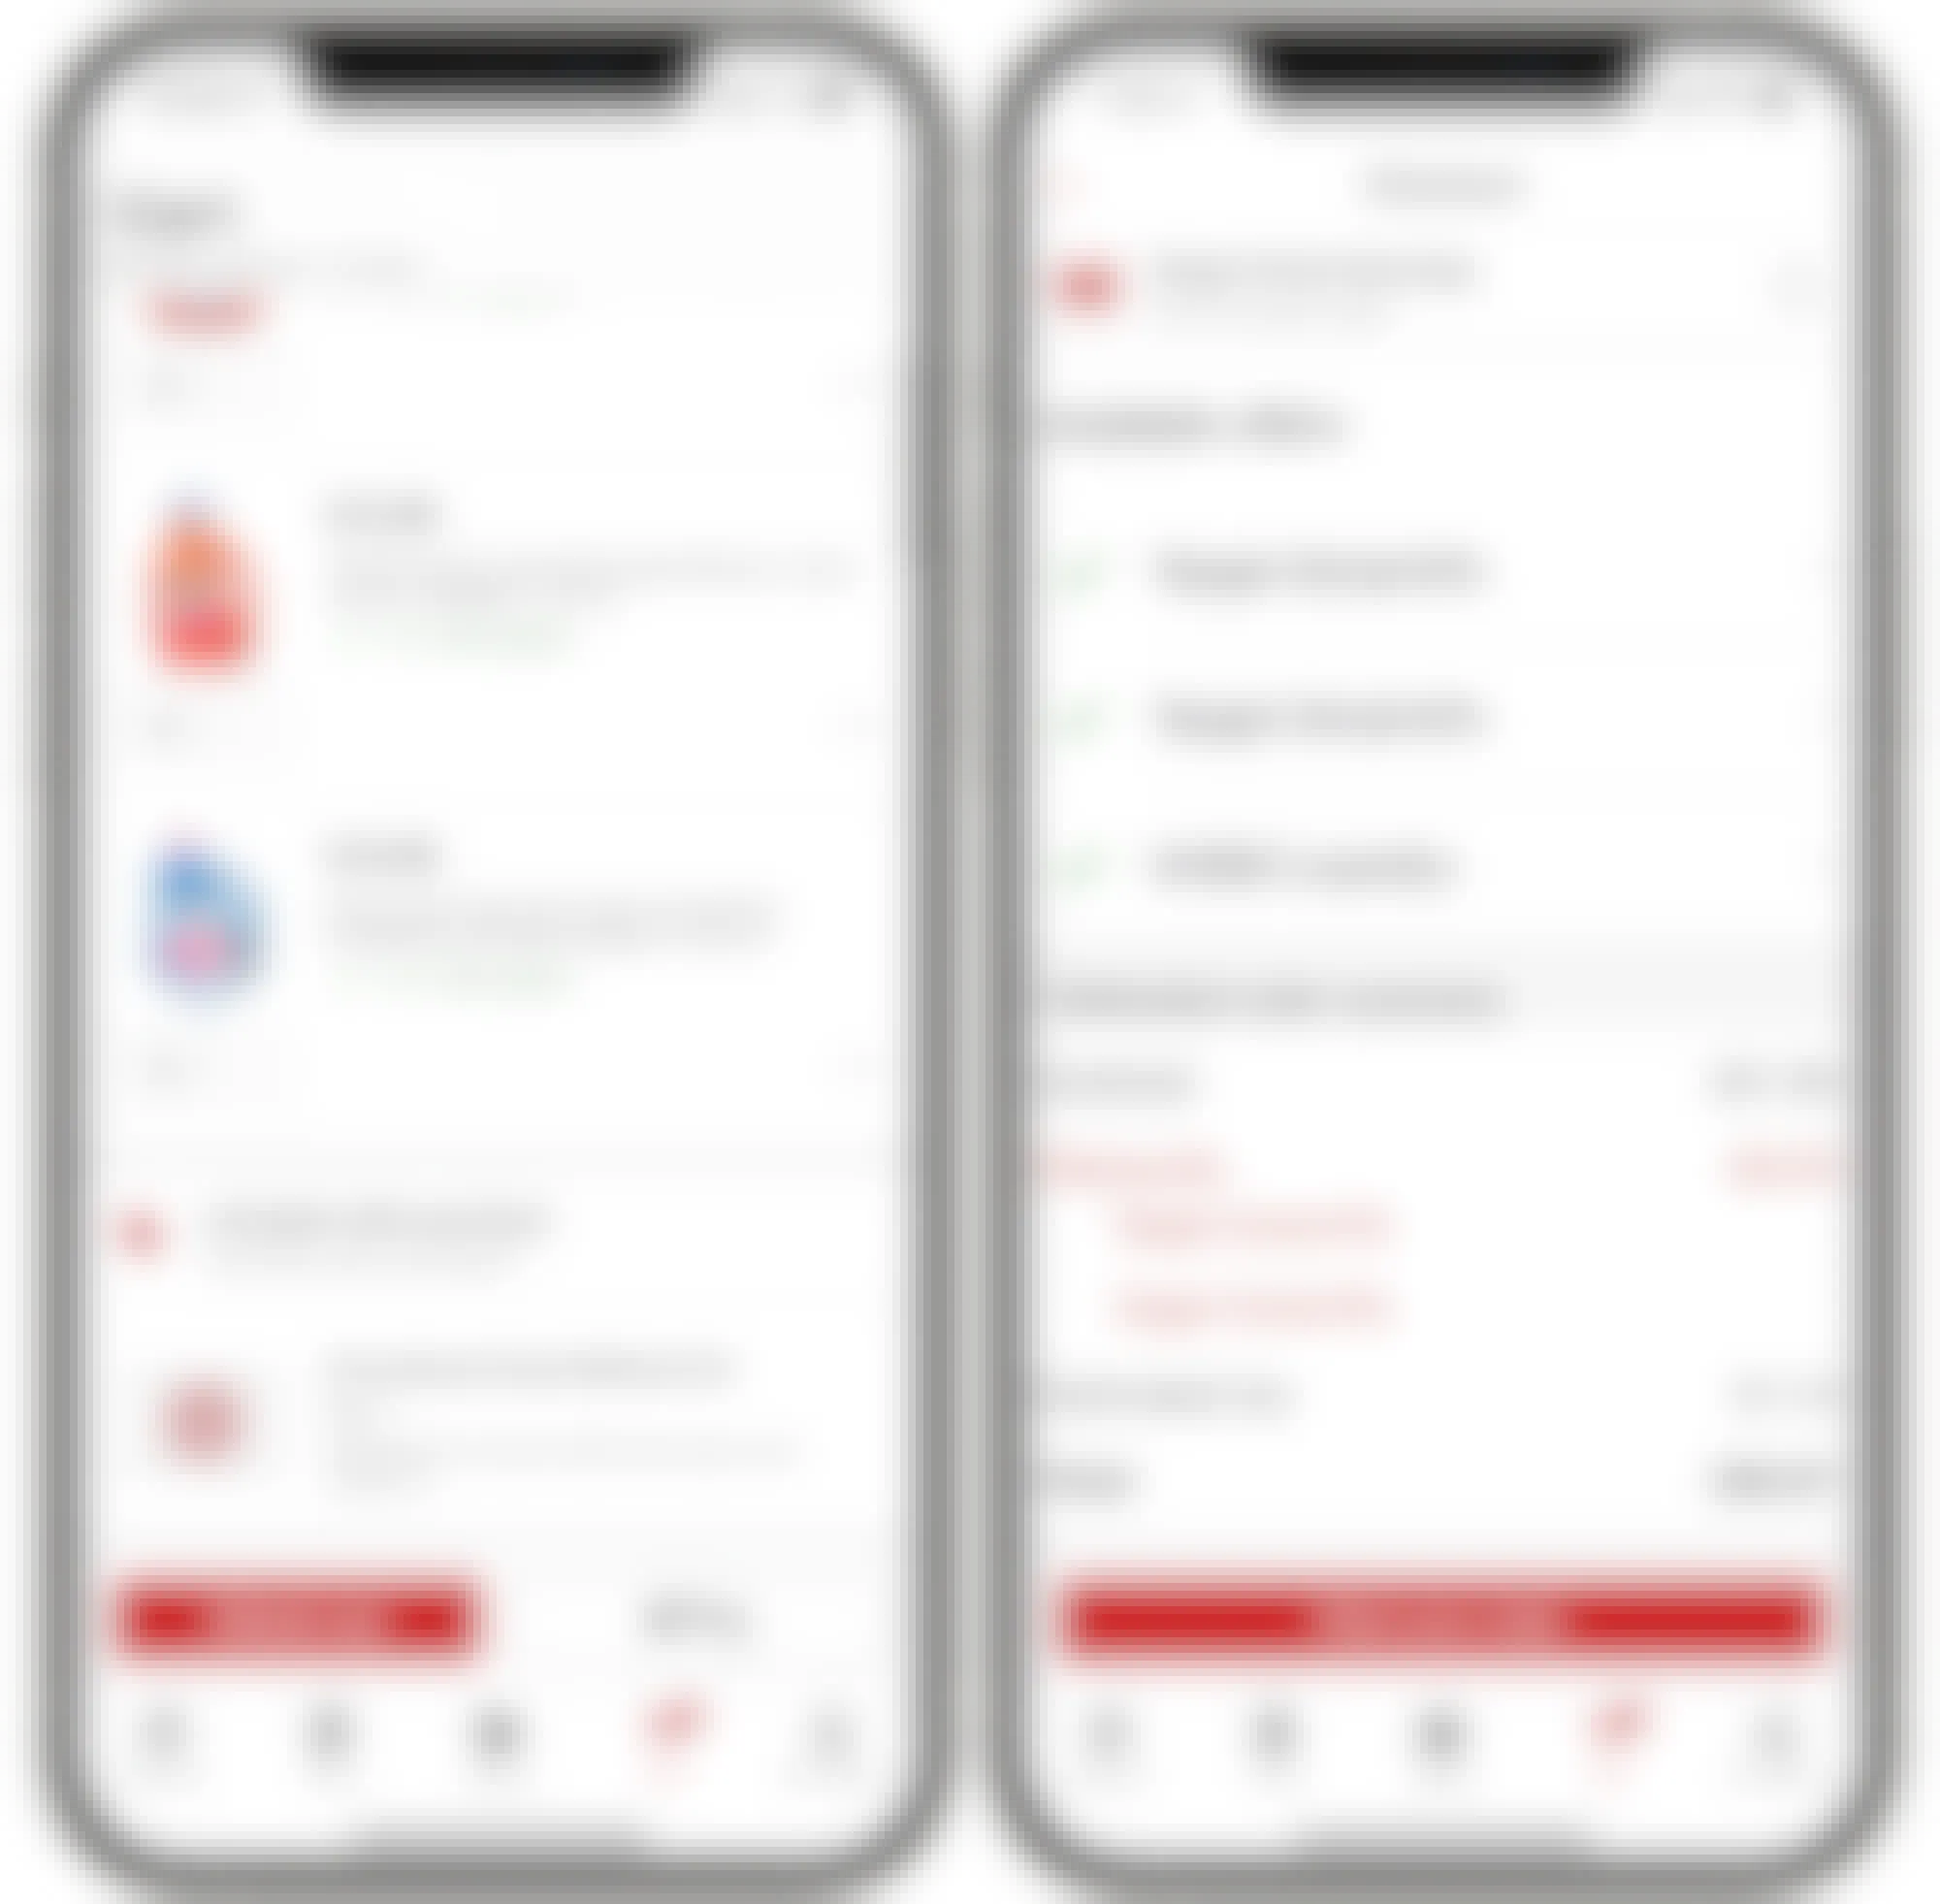 A graphic of two iPhones displaying the user's Cart and Checkout page on the Target Circle app.